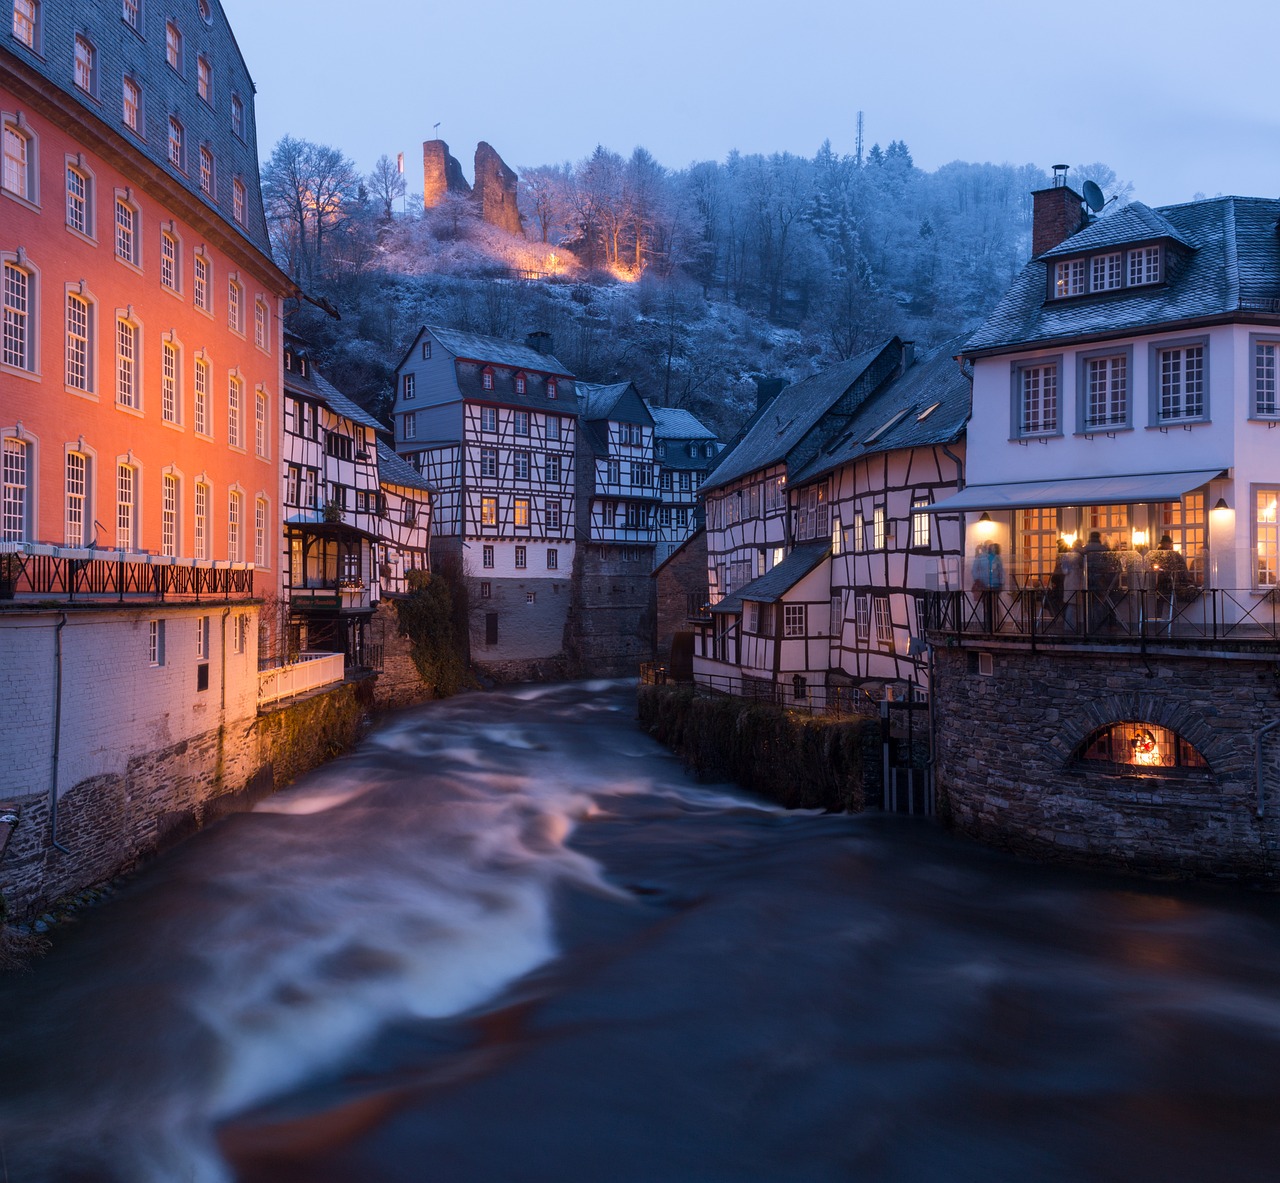 Historical and Culinary Delights of Monschau